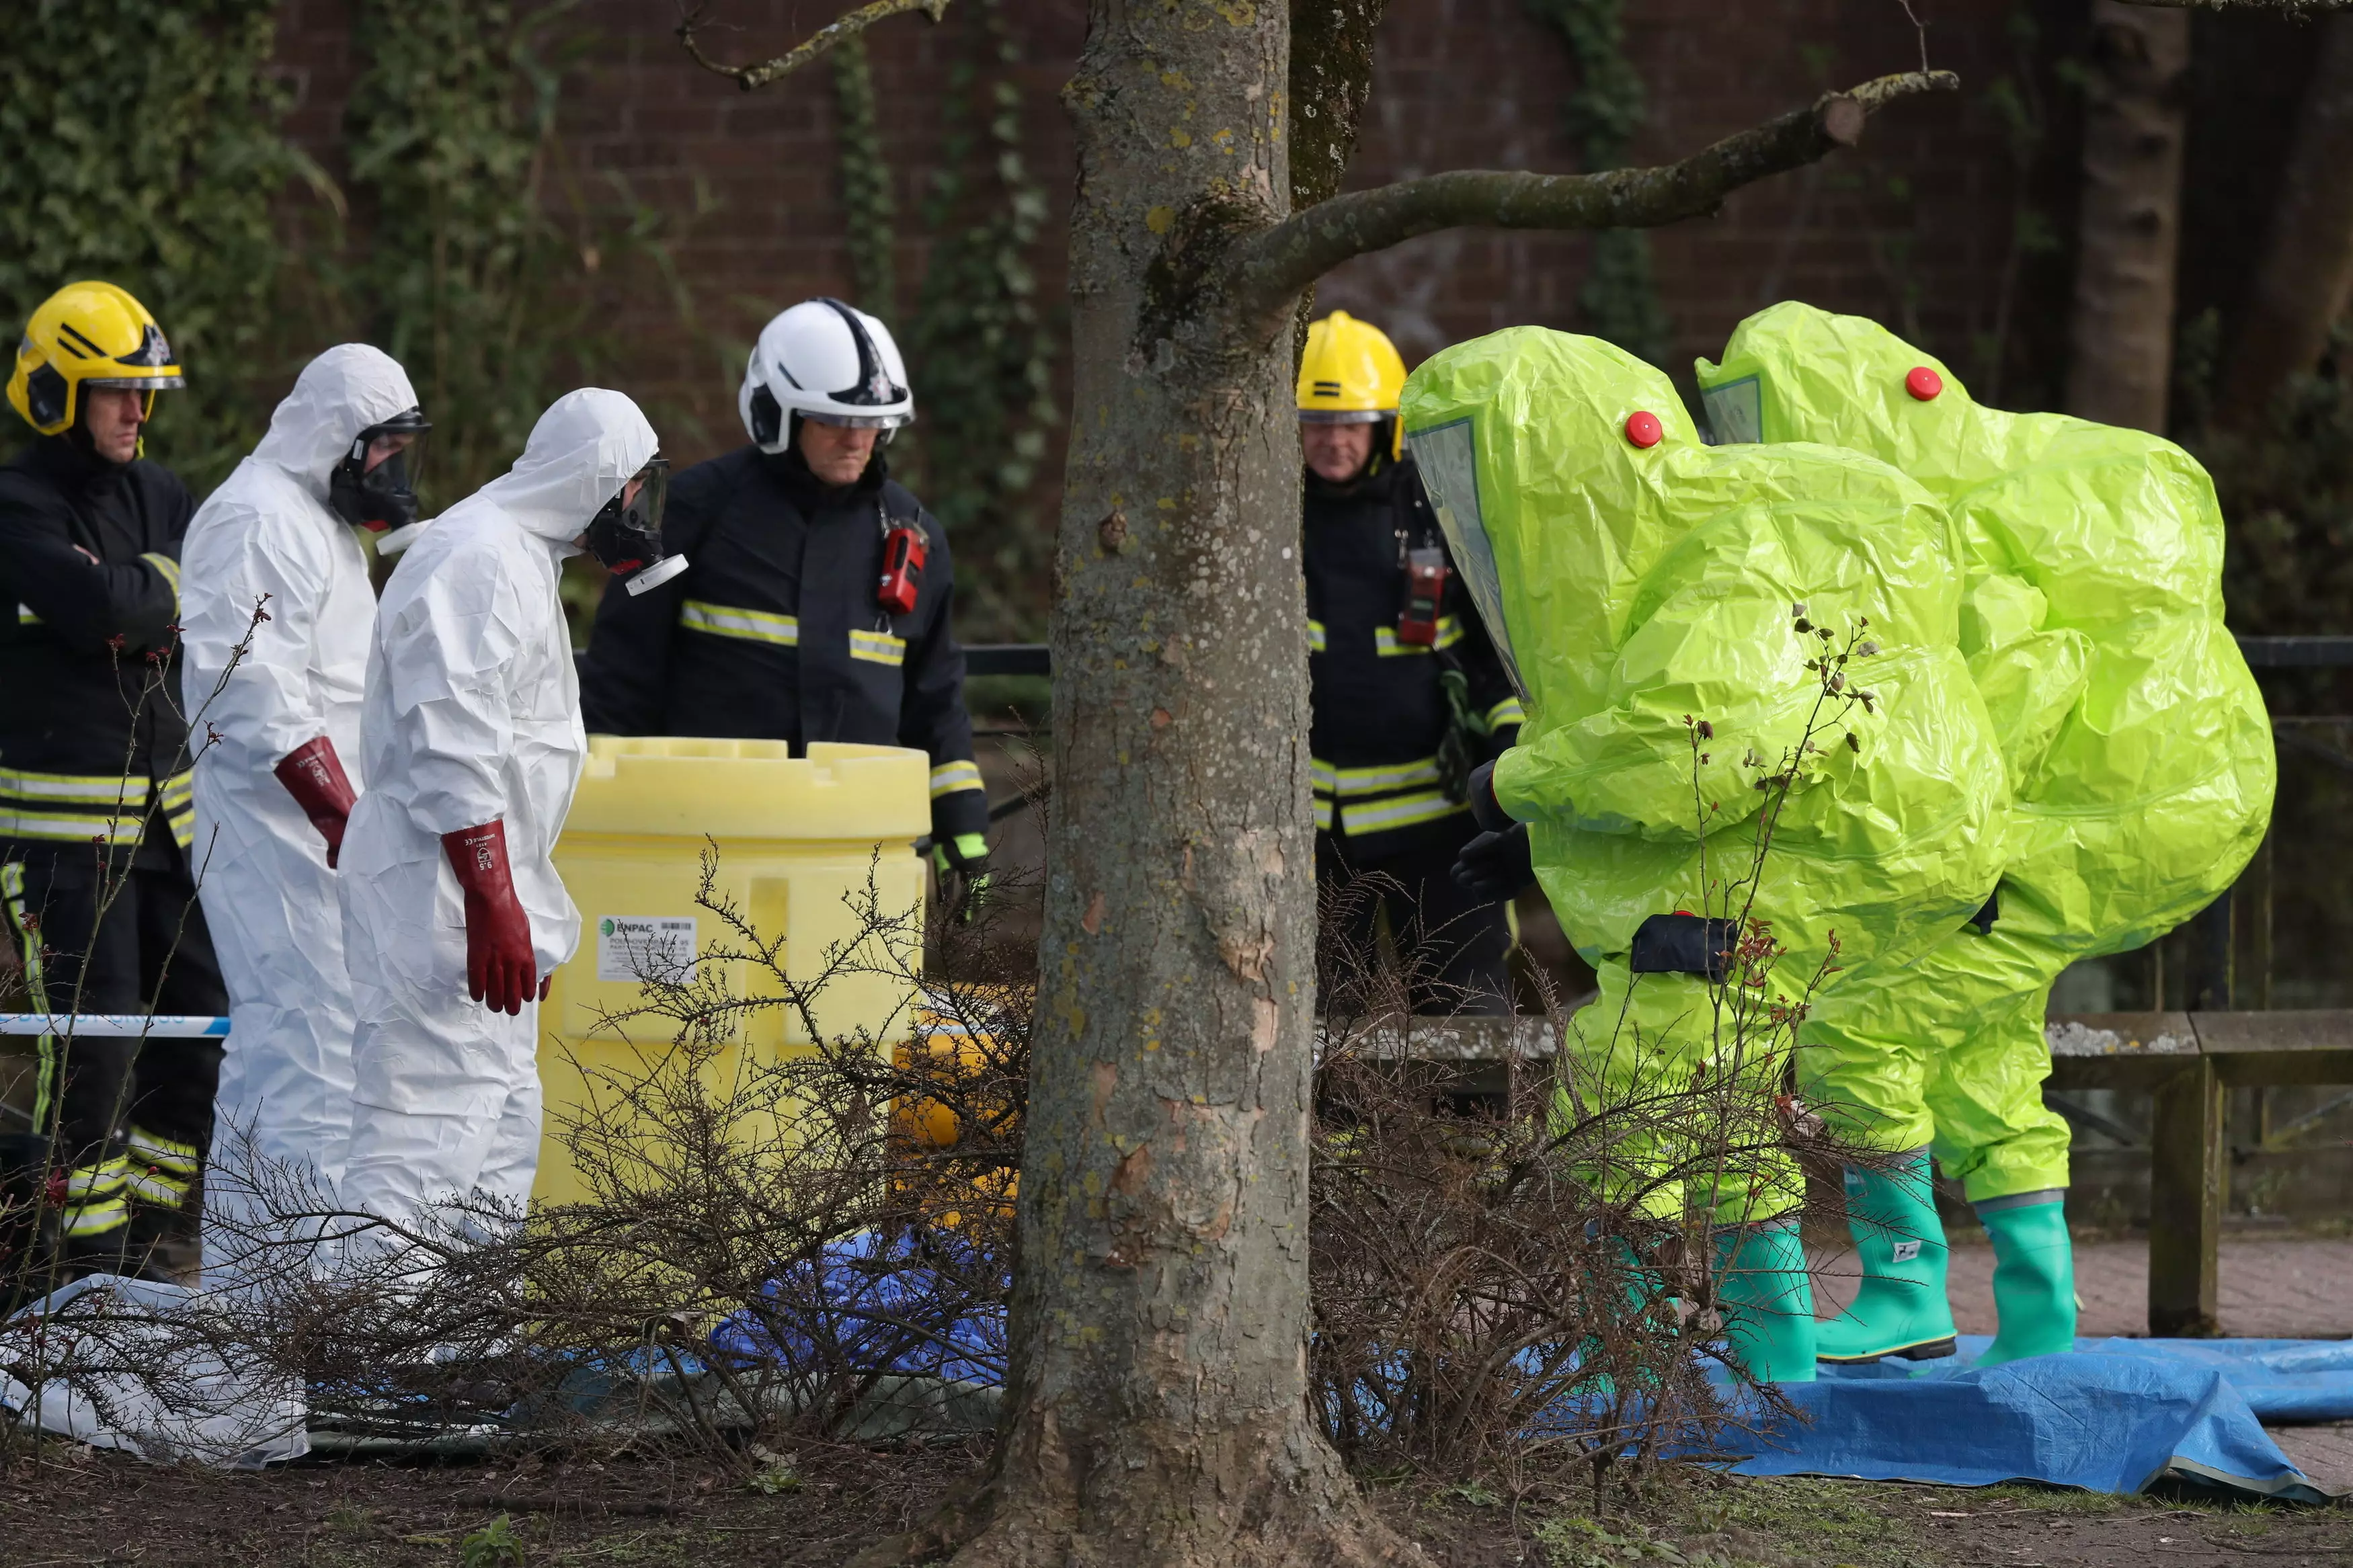 The Salisbury Poisonings was inspired by real events (